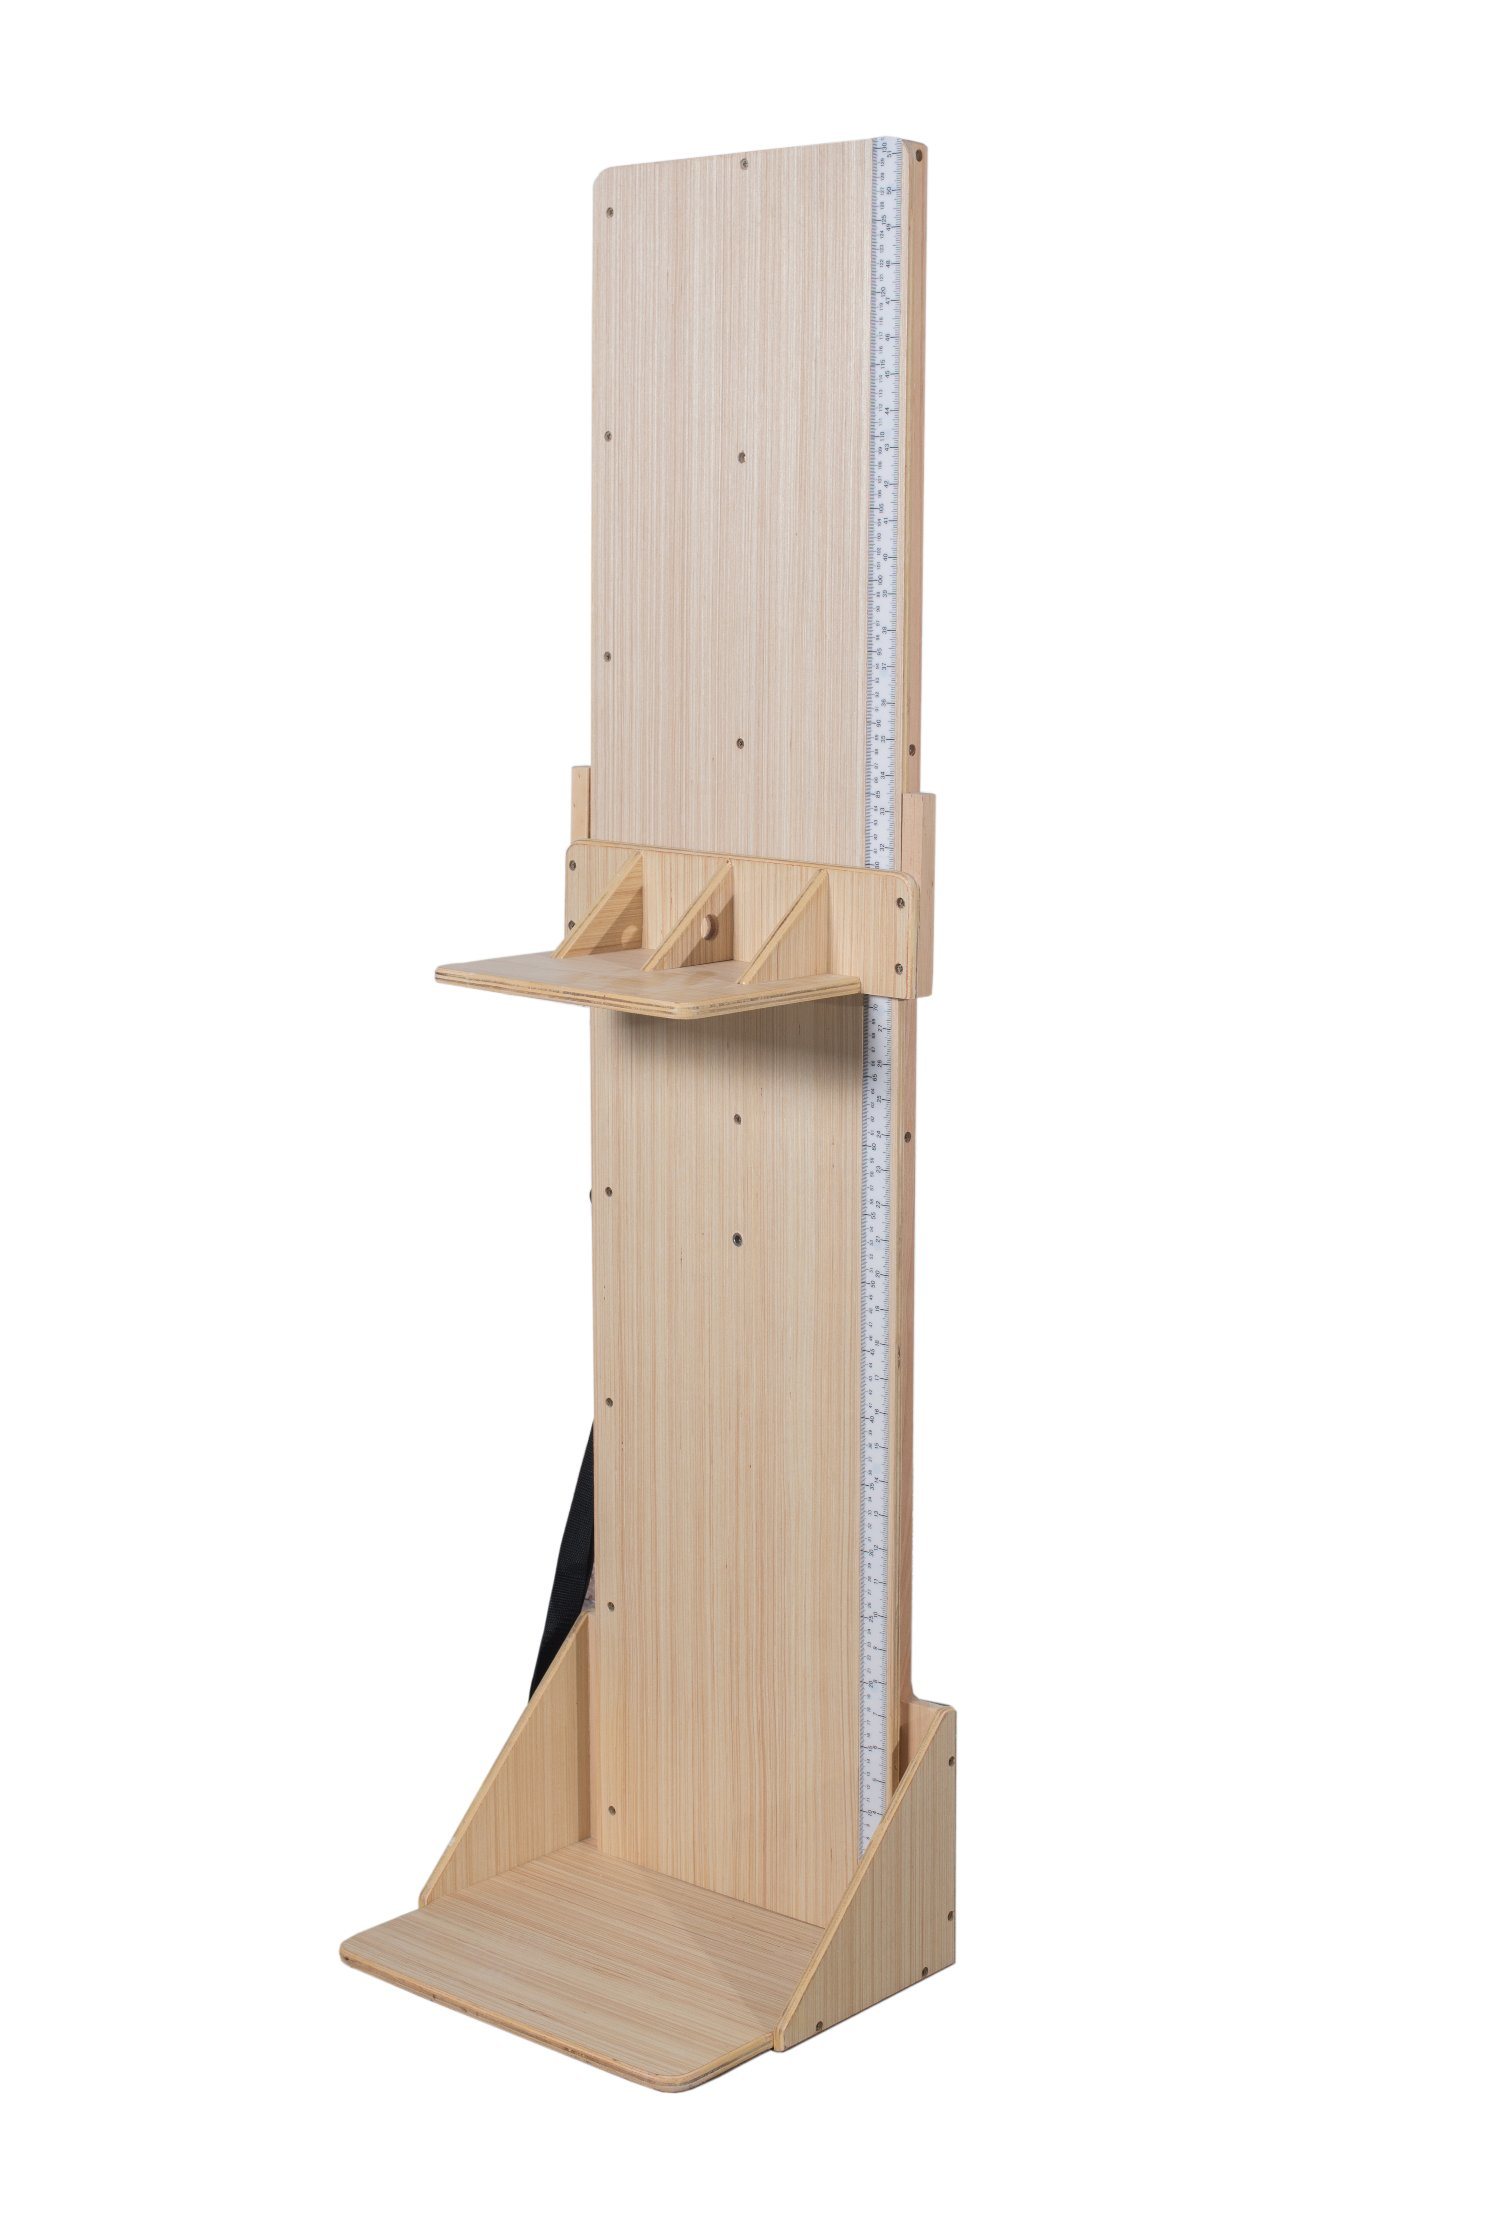 Stadiometer/ Height Stand Wooden DI-012B